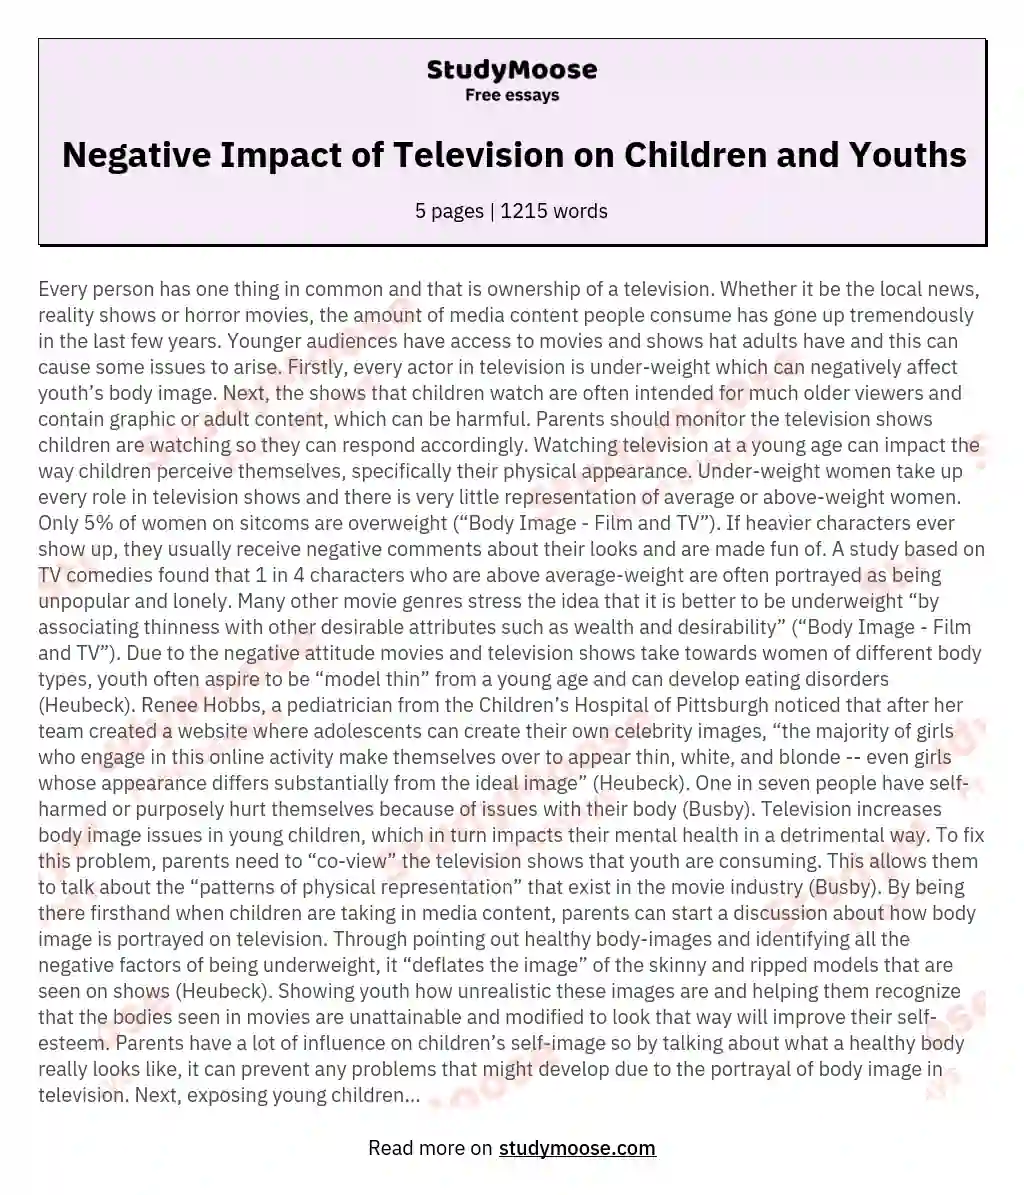 essay the effects of watching television on adolescents quizlet